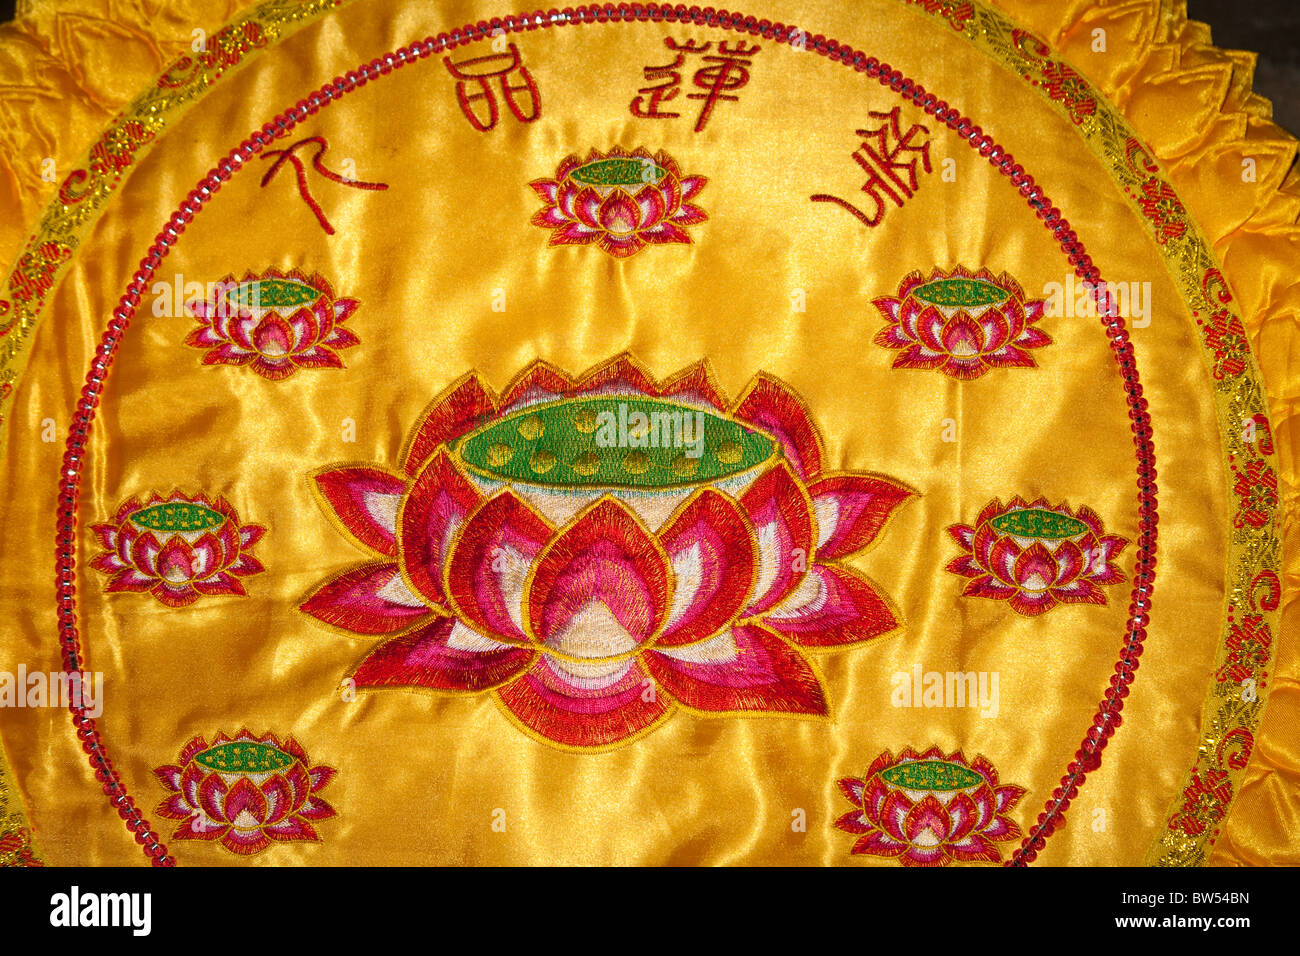 Colourful Chinese embroidered silk prayer stool, Luoyang Folklore Museum, Luoyang, China Stock Photo